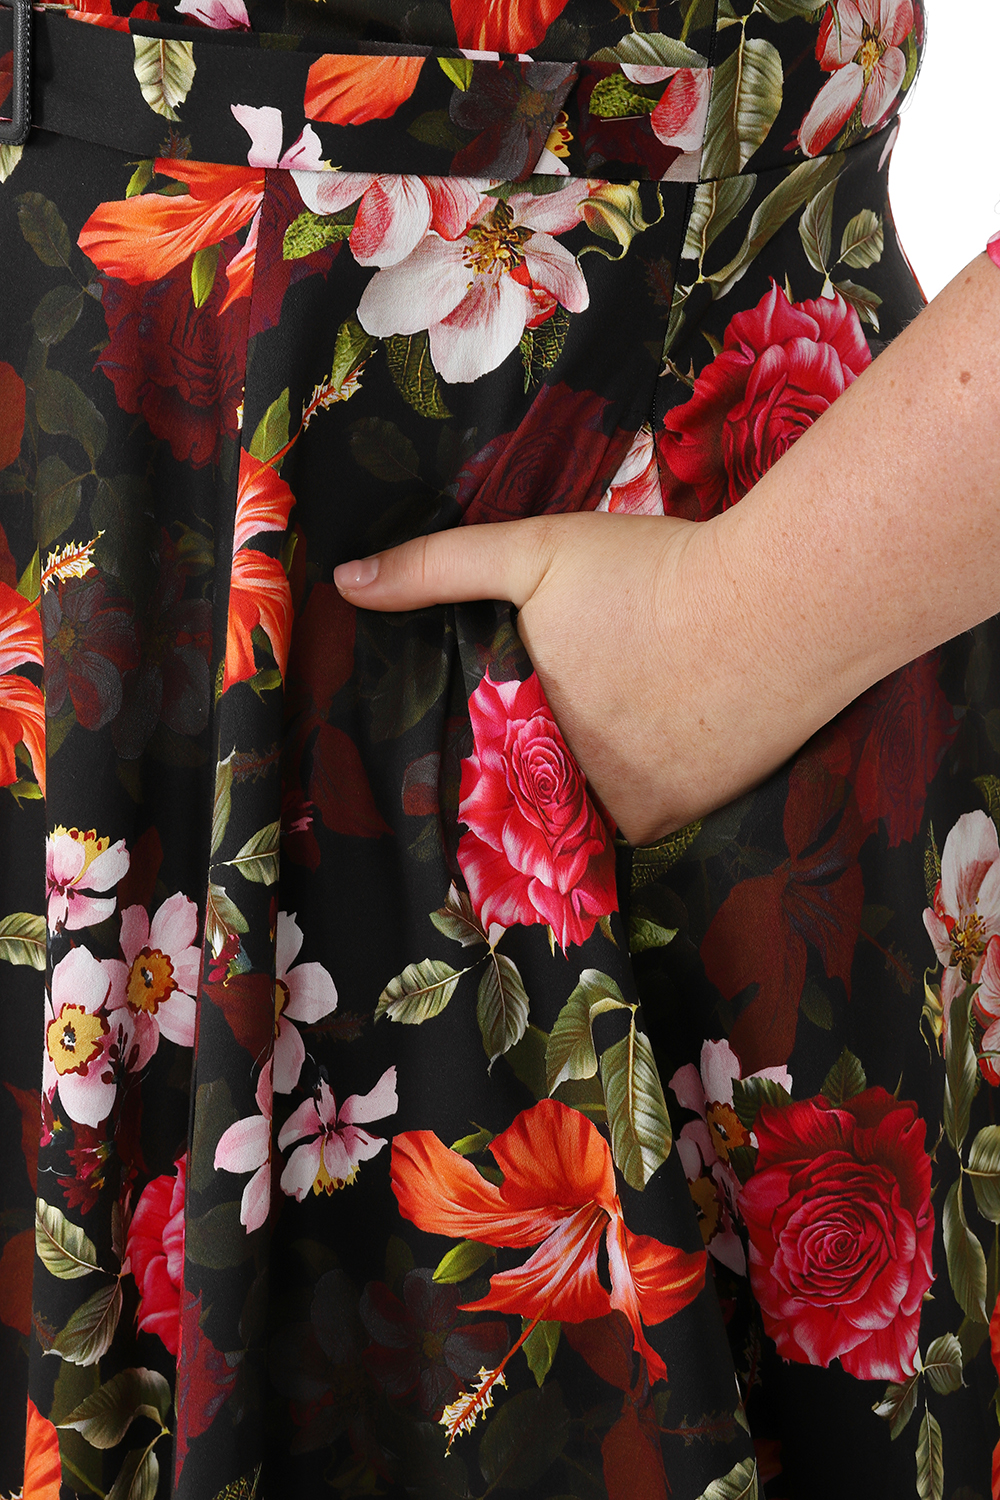 Kali Floral Swing Dress in Extended Sizing